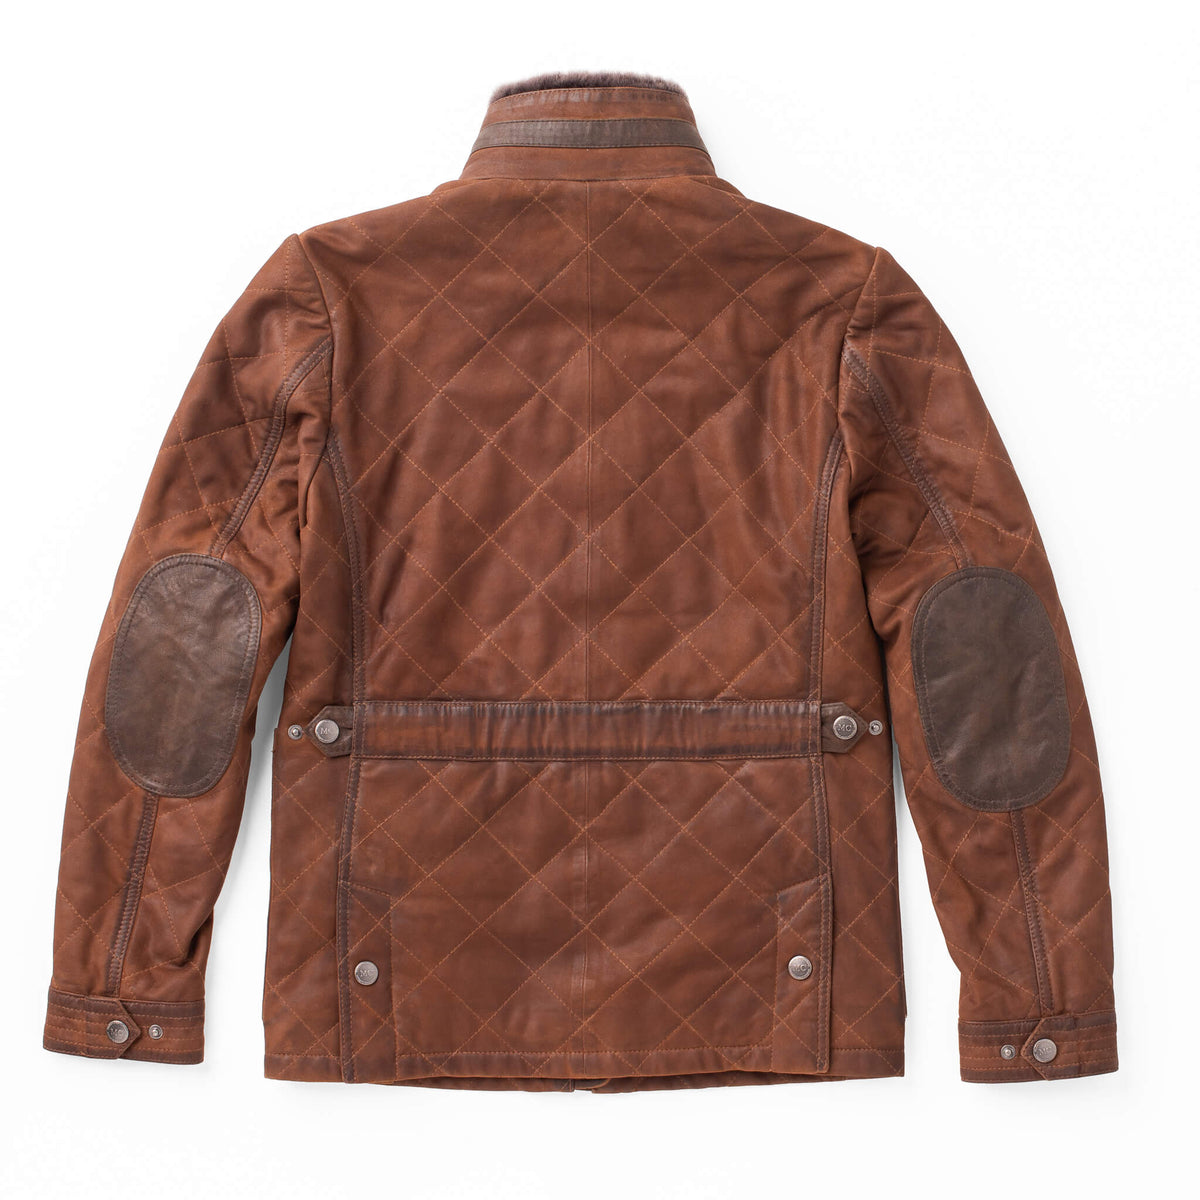 Wasatch Waxed Suede Leather Jacket